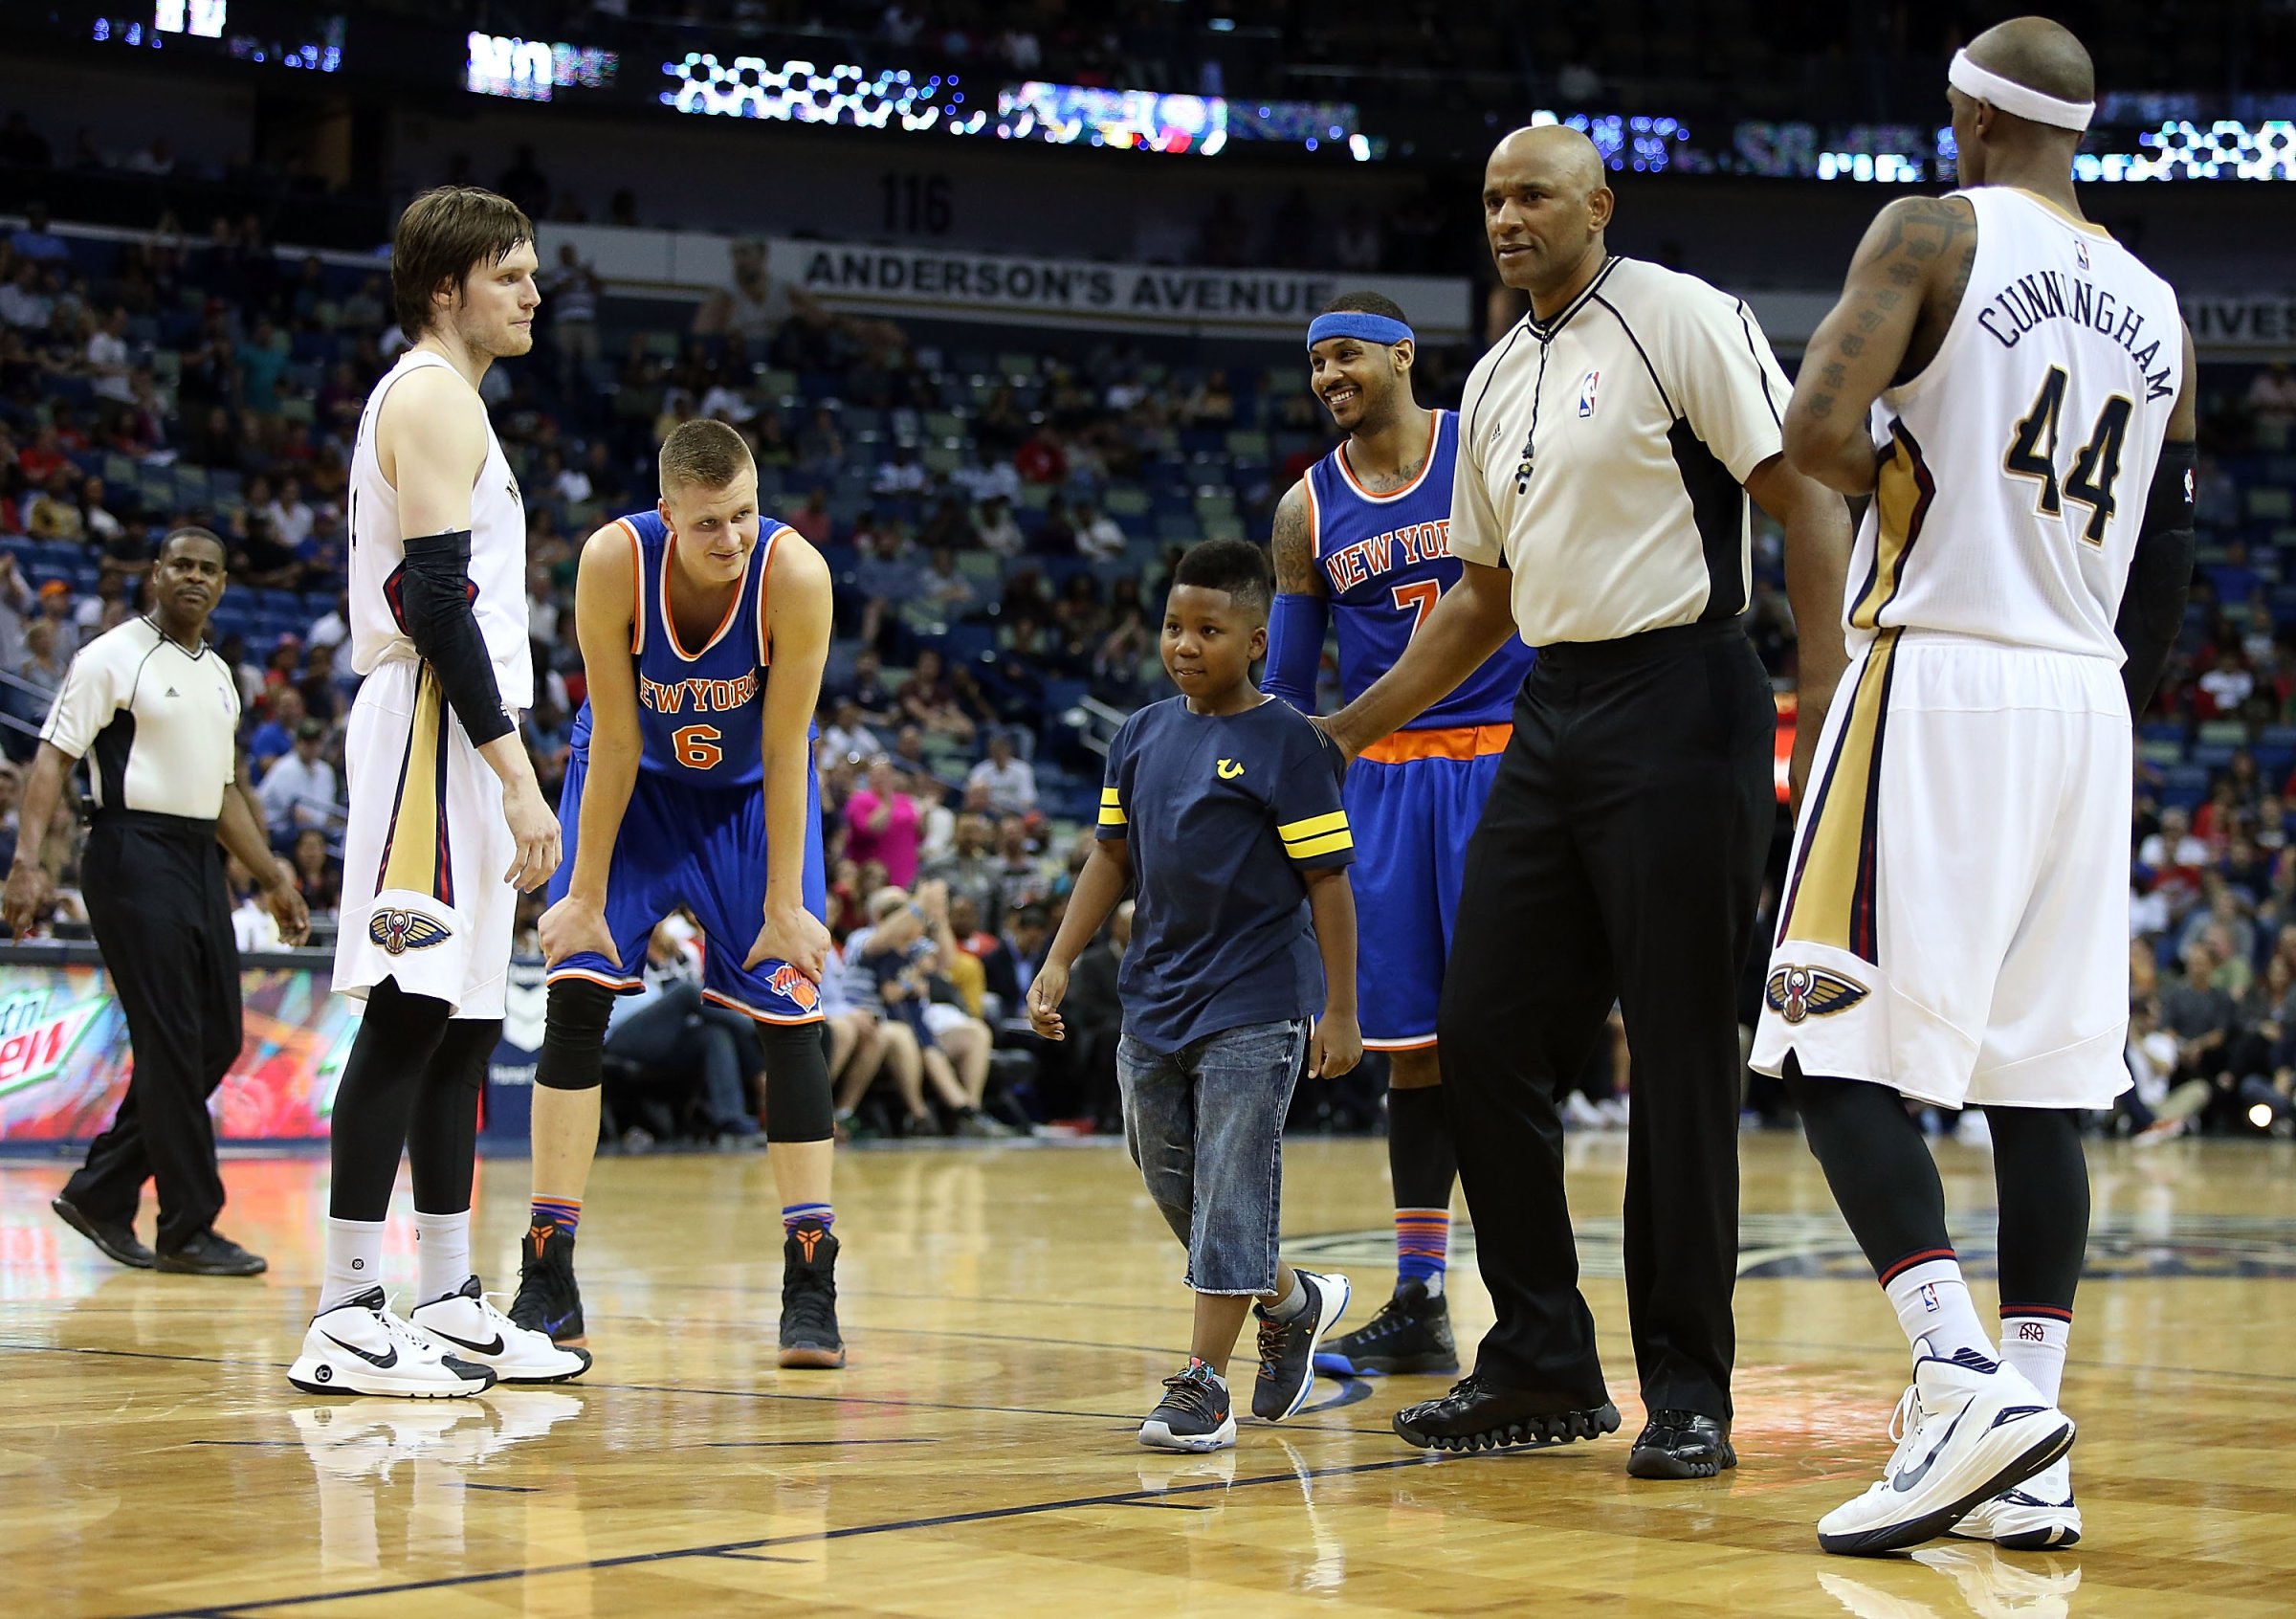 A young boy is escorted off the court after hugging Carmelo Anthony #7 of the New York Knicks during a game against the New Orleans Pelicans during the second half at the Smoothie King Center on March 28, 2016 in New Orleans, Louisiana.